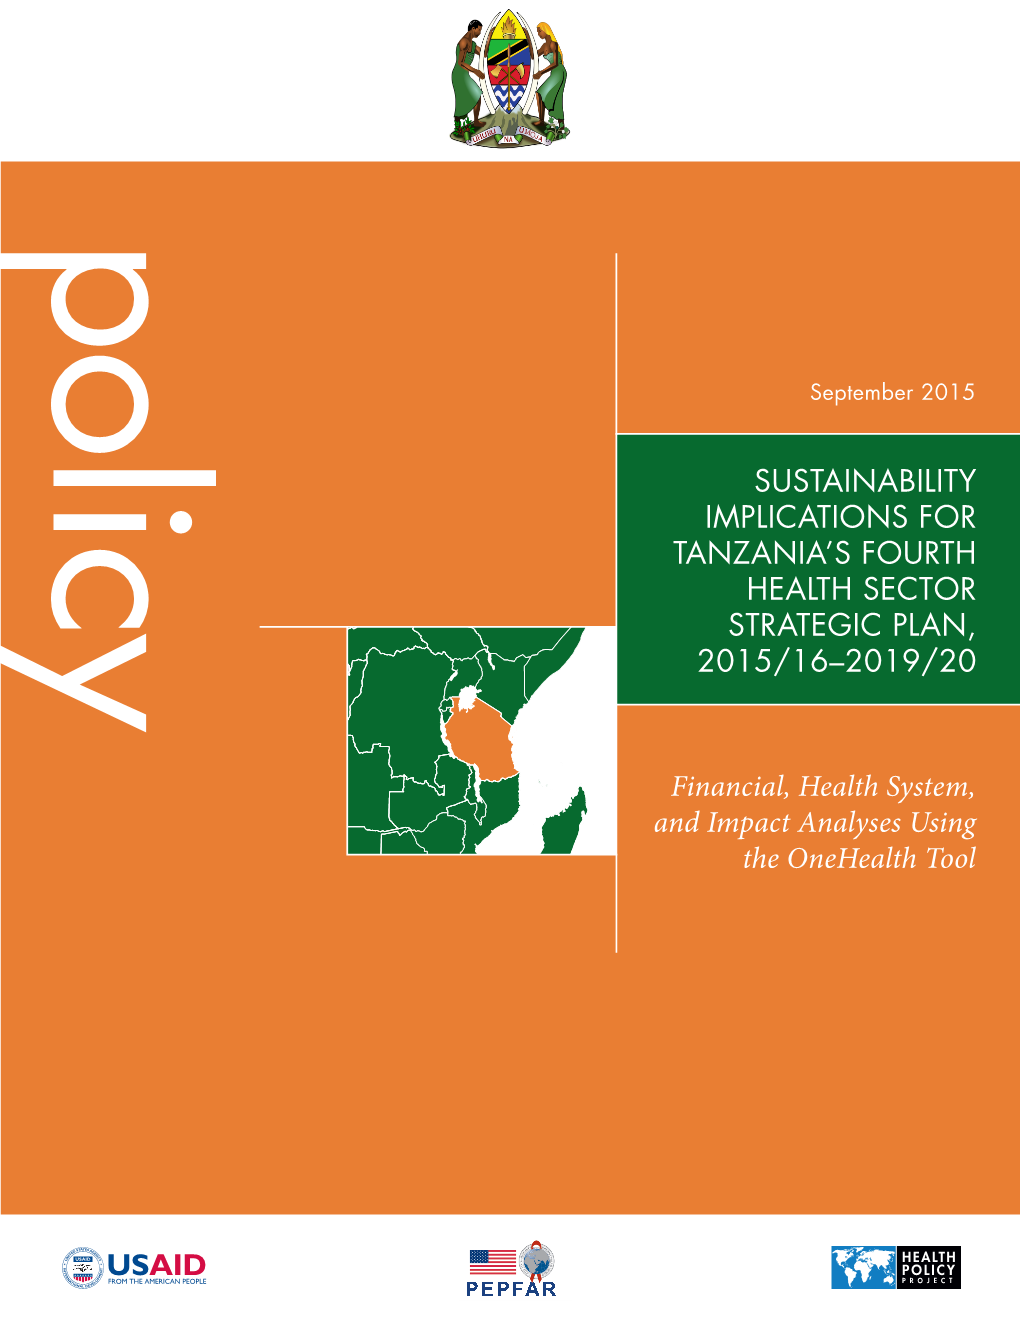 Sustainability Implications for Tanzania's Fourth Health Sector